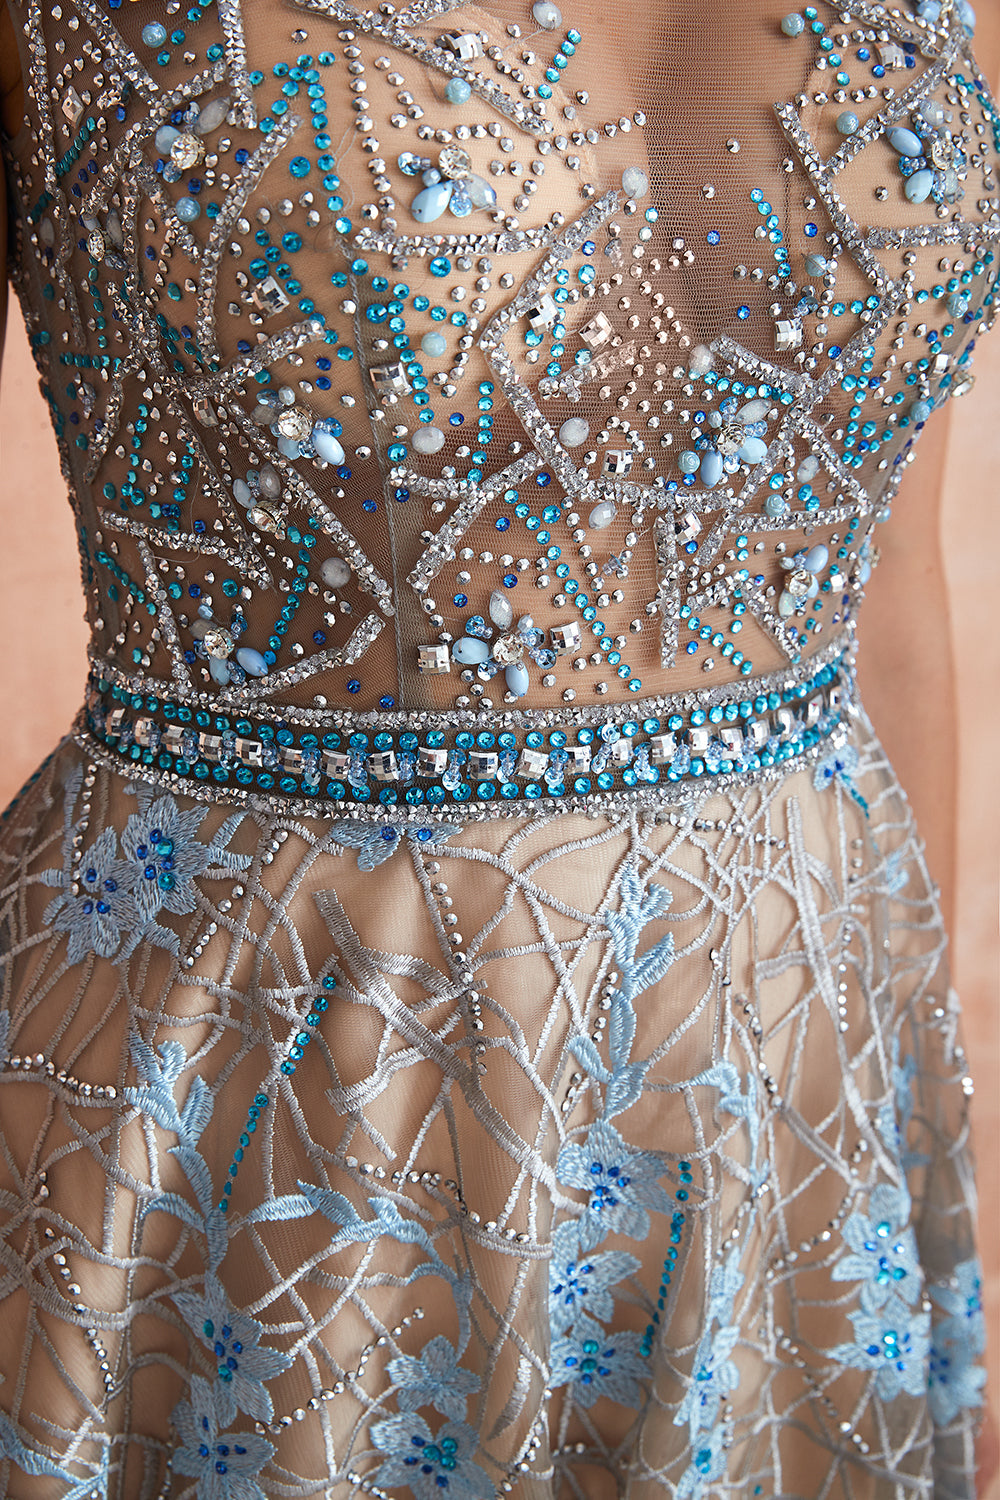 Designer Cap Sleeves Crystal Long Prom Dress With Blue Appliques